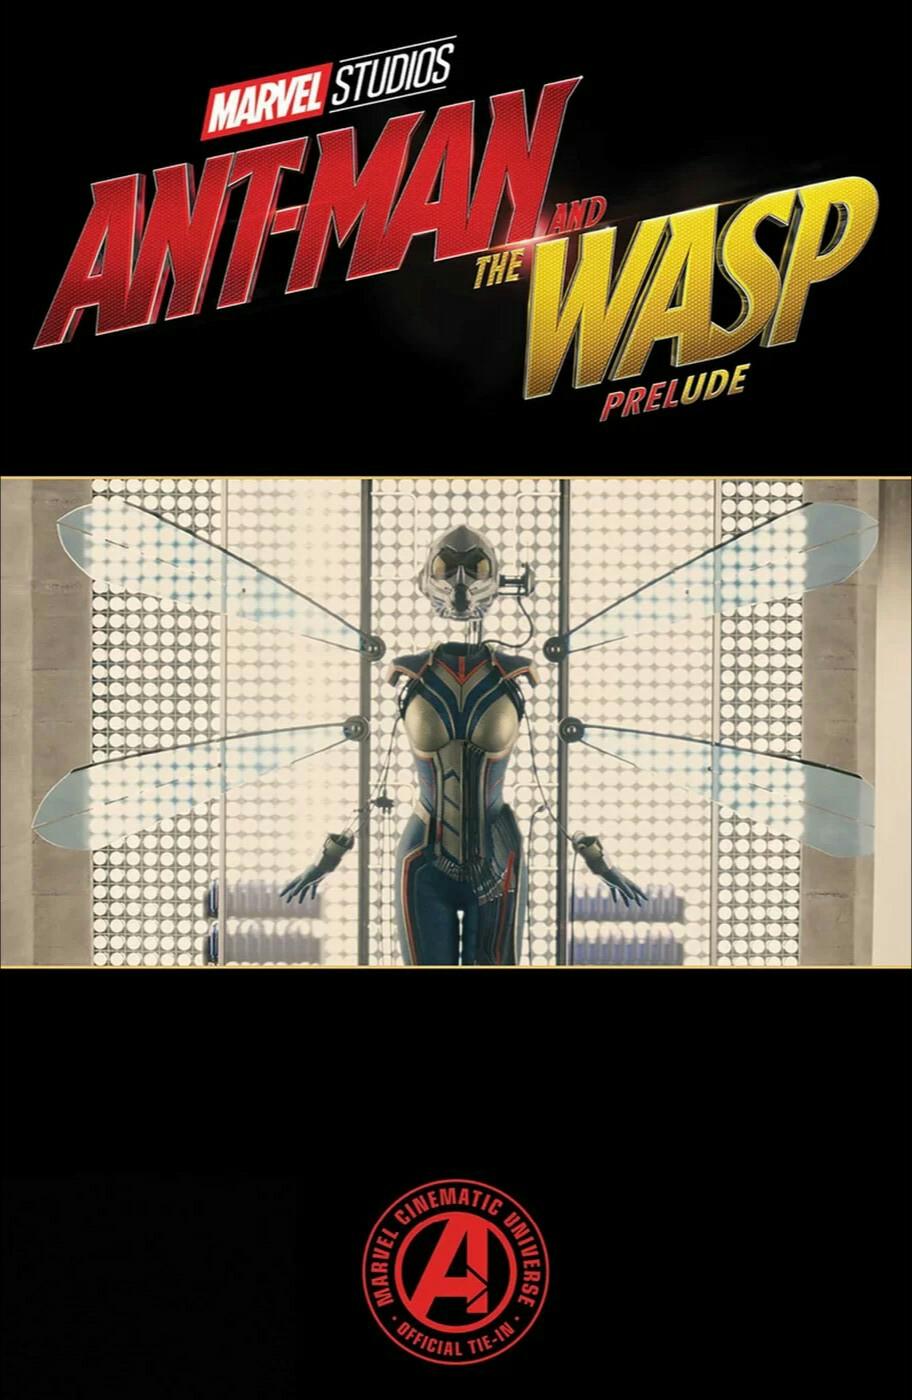 Marvel's Ant-Man and the Wasp Prelude Vol. 1 #2